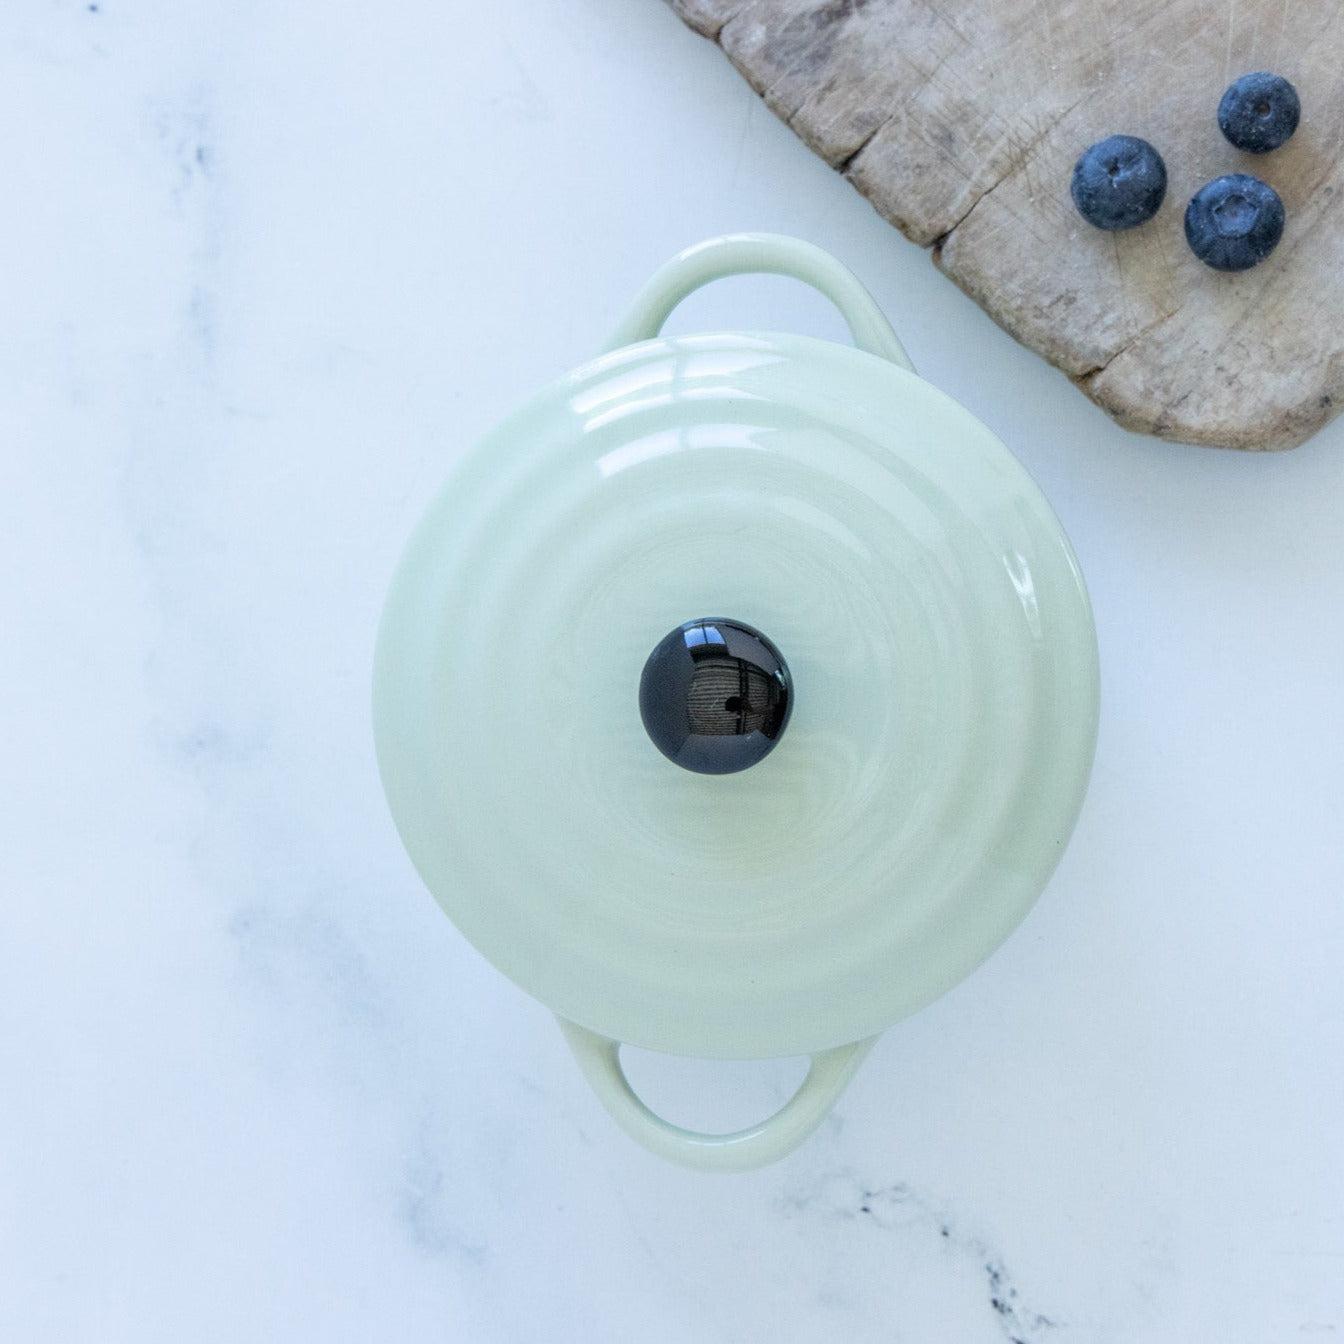 Stoneware Mini Baker with Lid